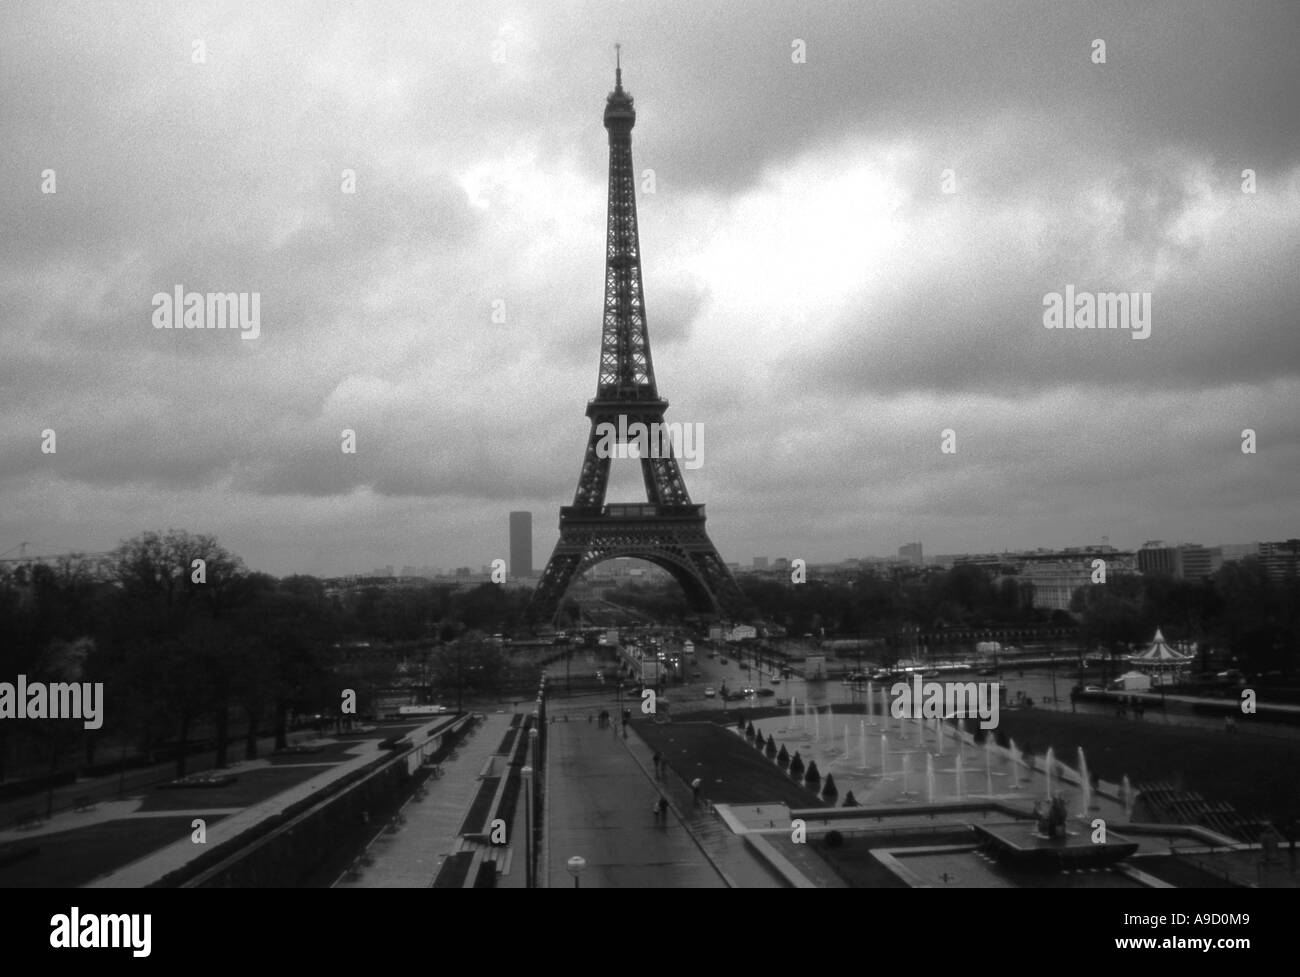 View of magnificent Tour Eiffel Tower one the highest iron buildings in the World Paris northern France Europe Stock Photo